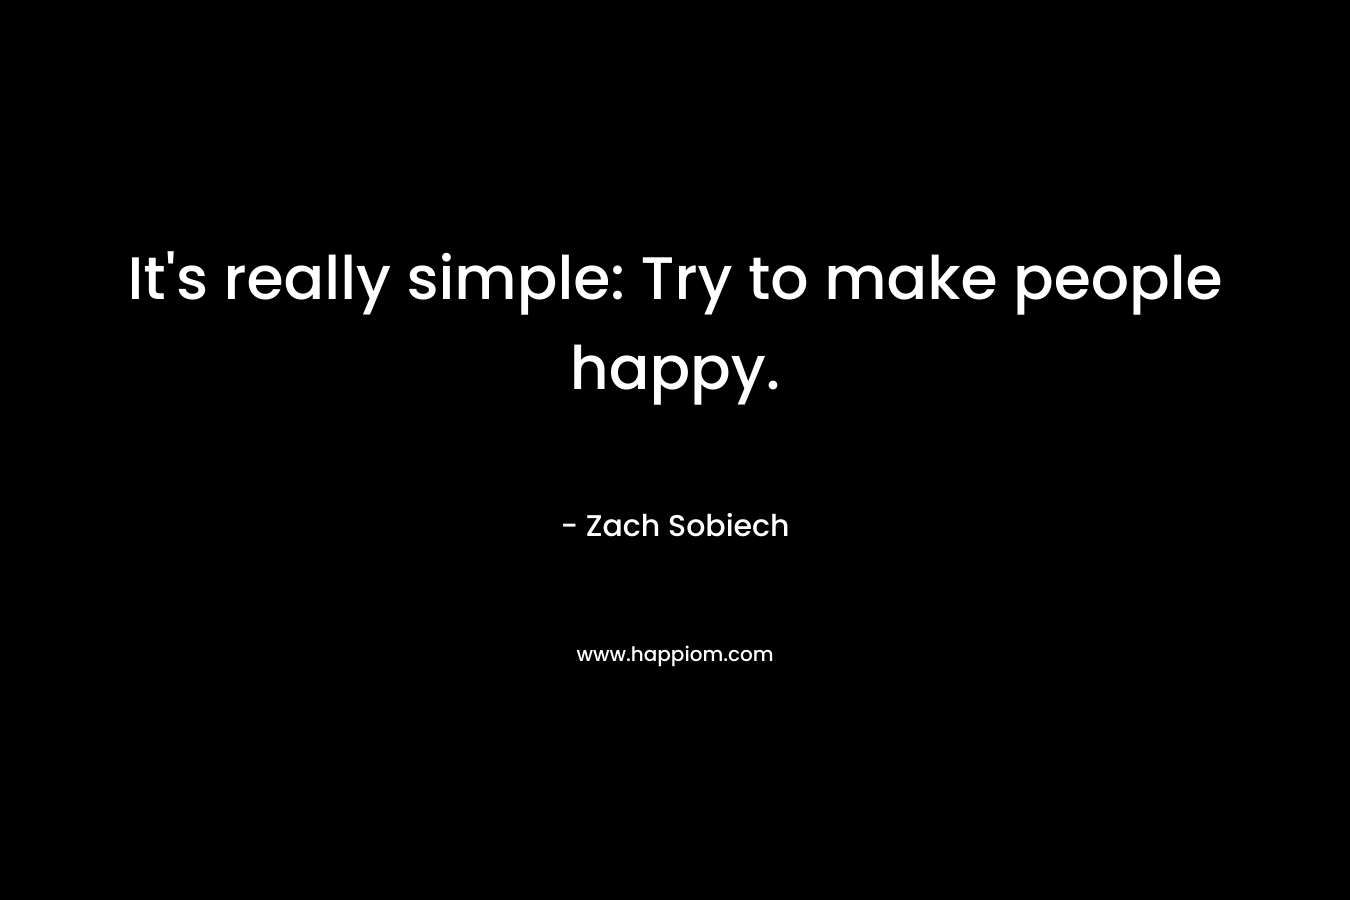 It's really simple: Try to make people happy.